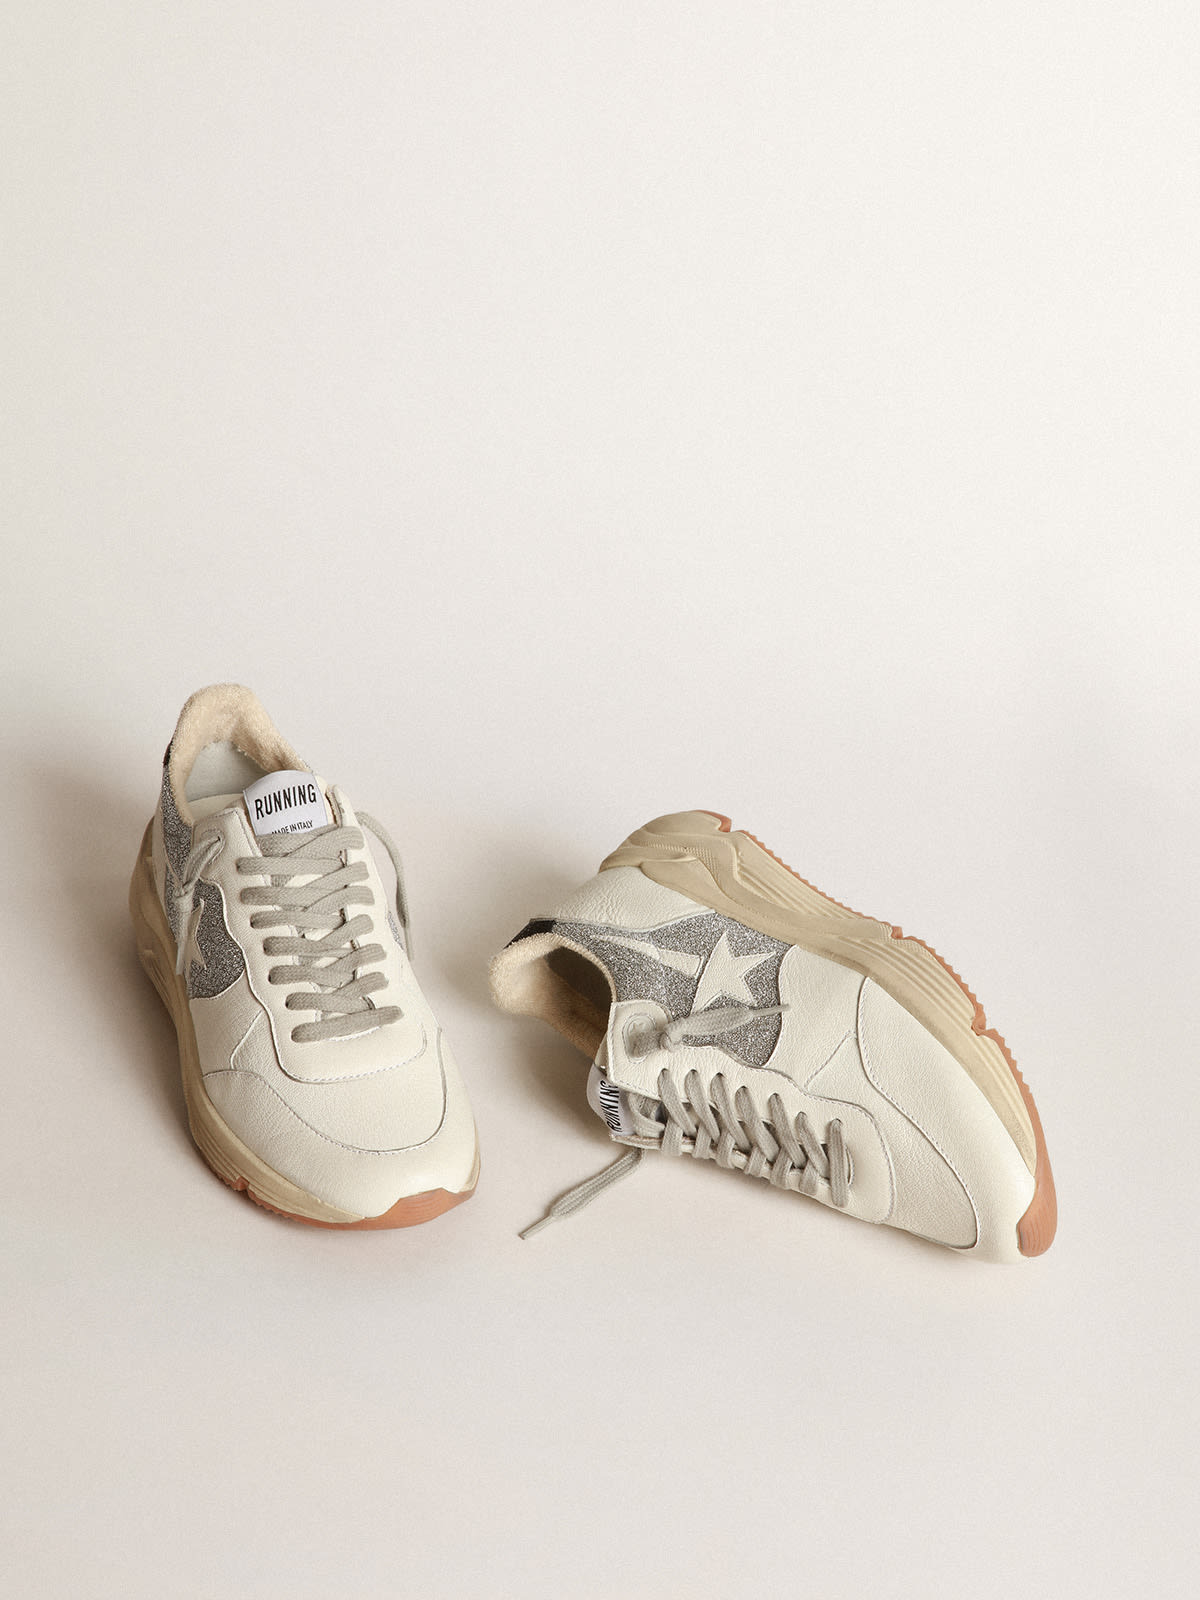 Golden Goose - Women’s Running Sole LAB with silver and black Swarovski inserts in 